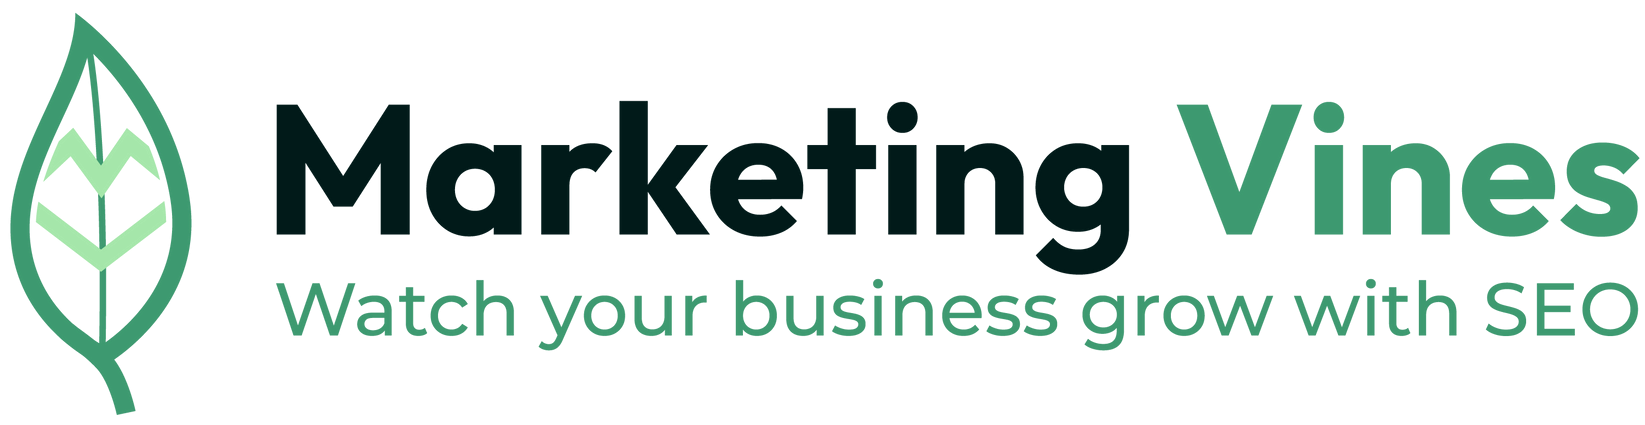 A logo for marketing vines watch your business grow with seo